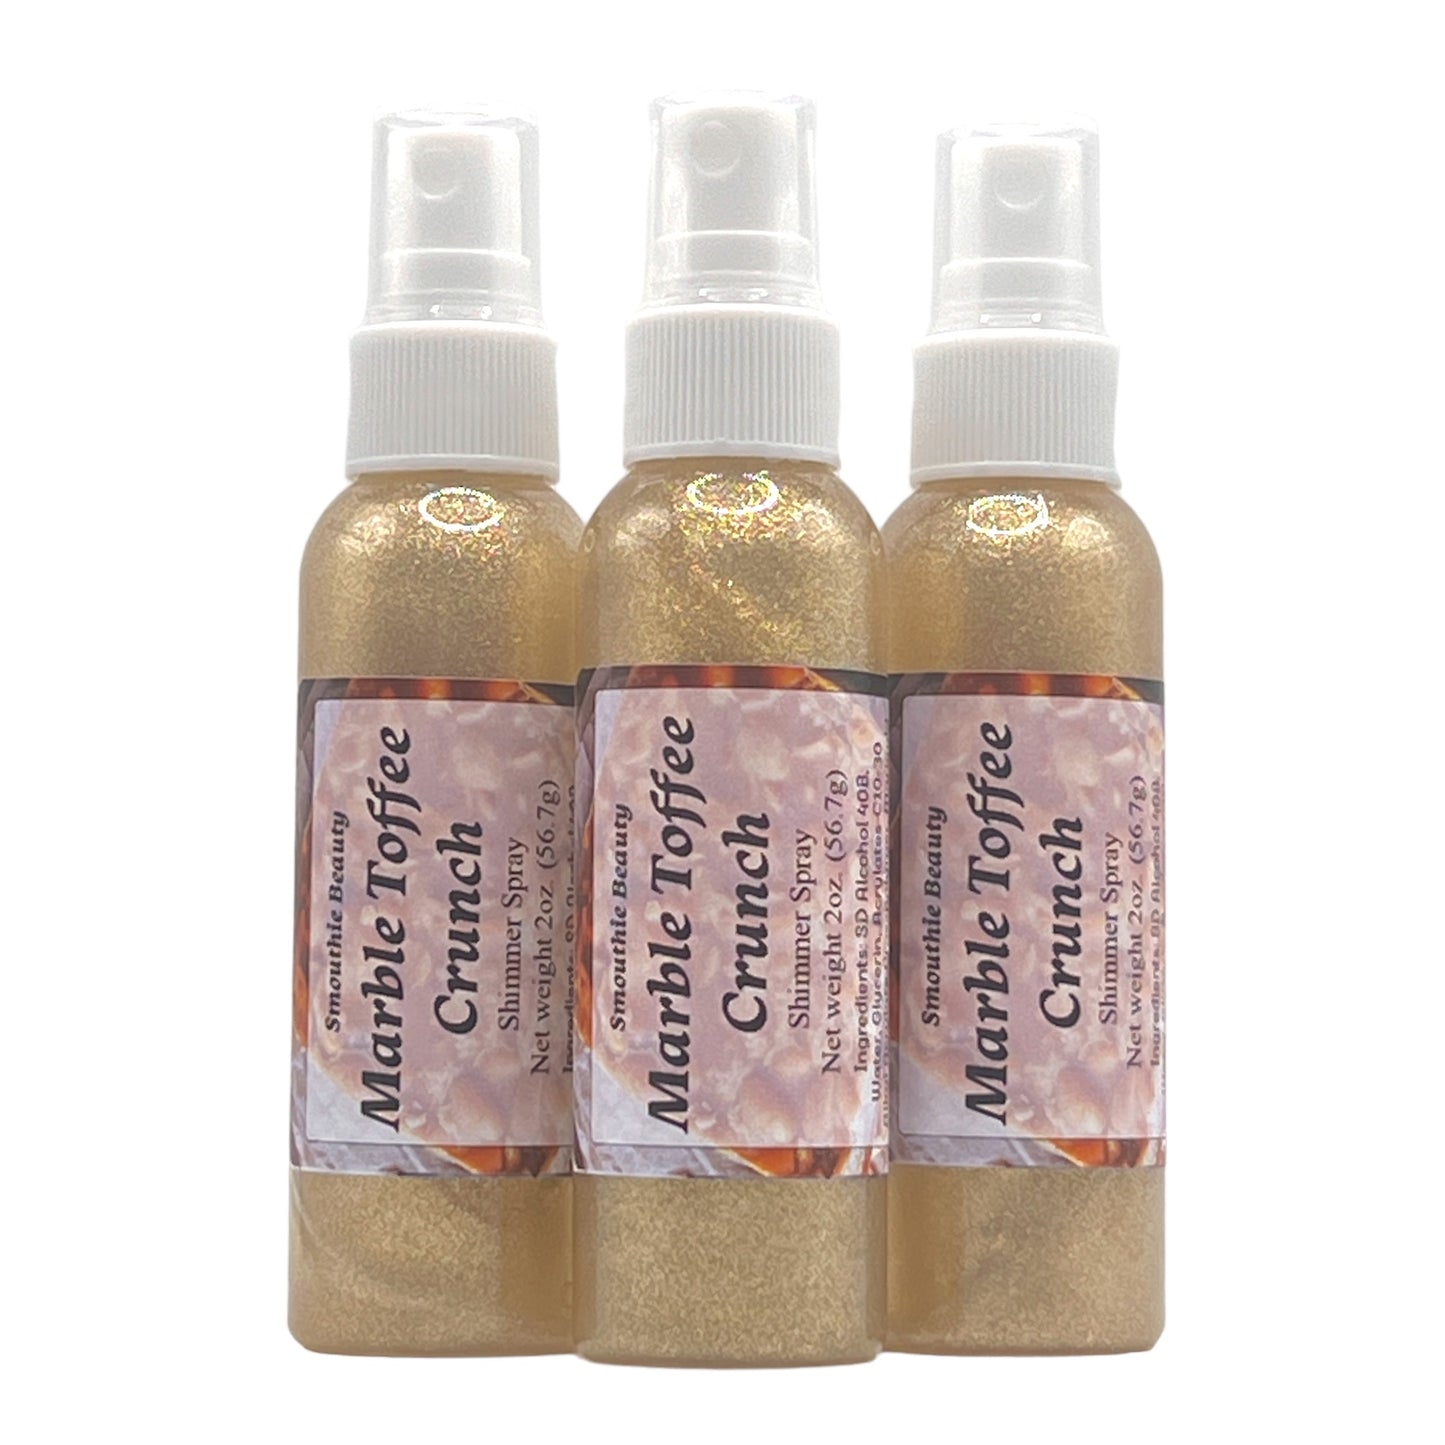 Marble Toffee Crunch Shimmer Mist